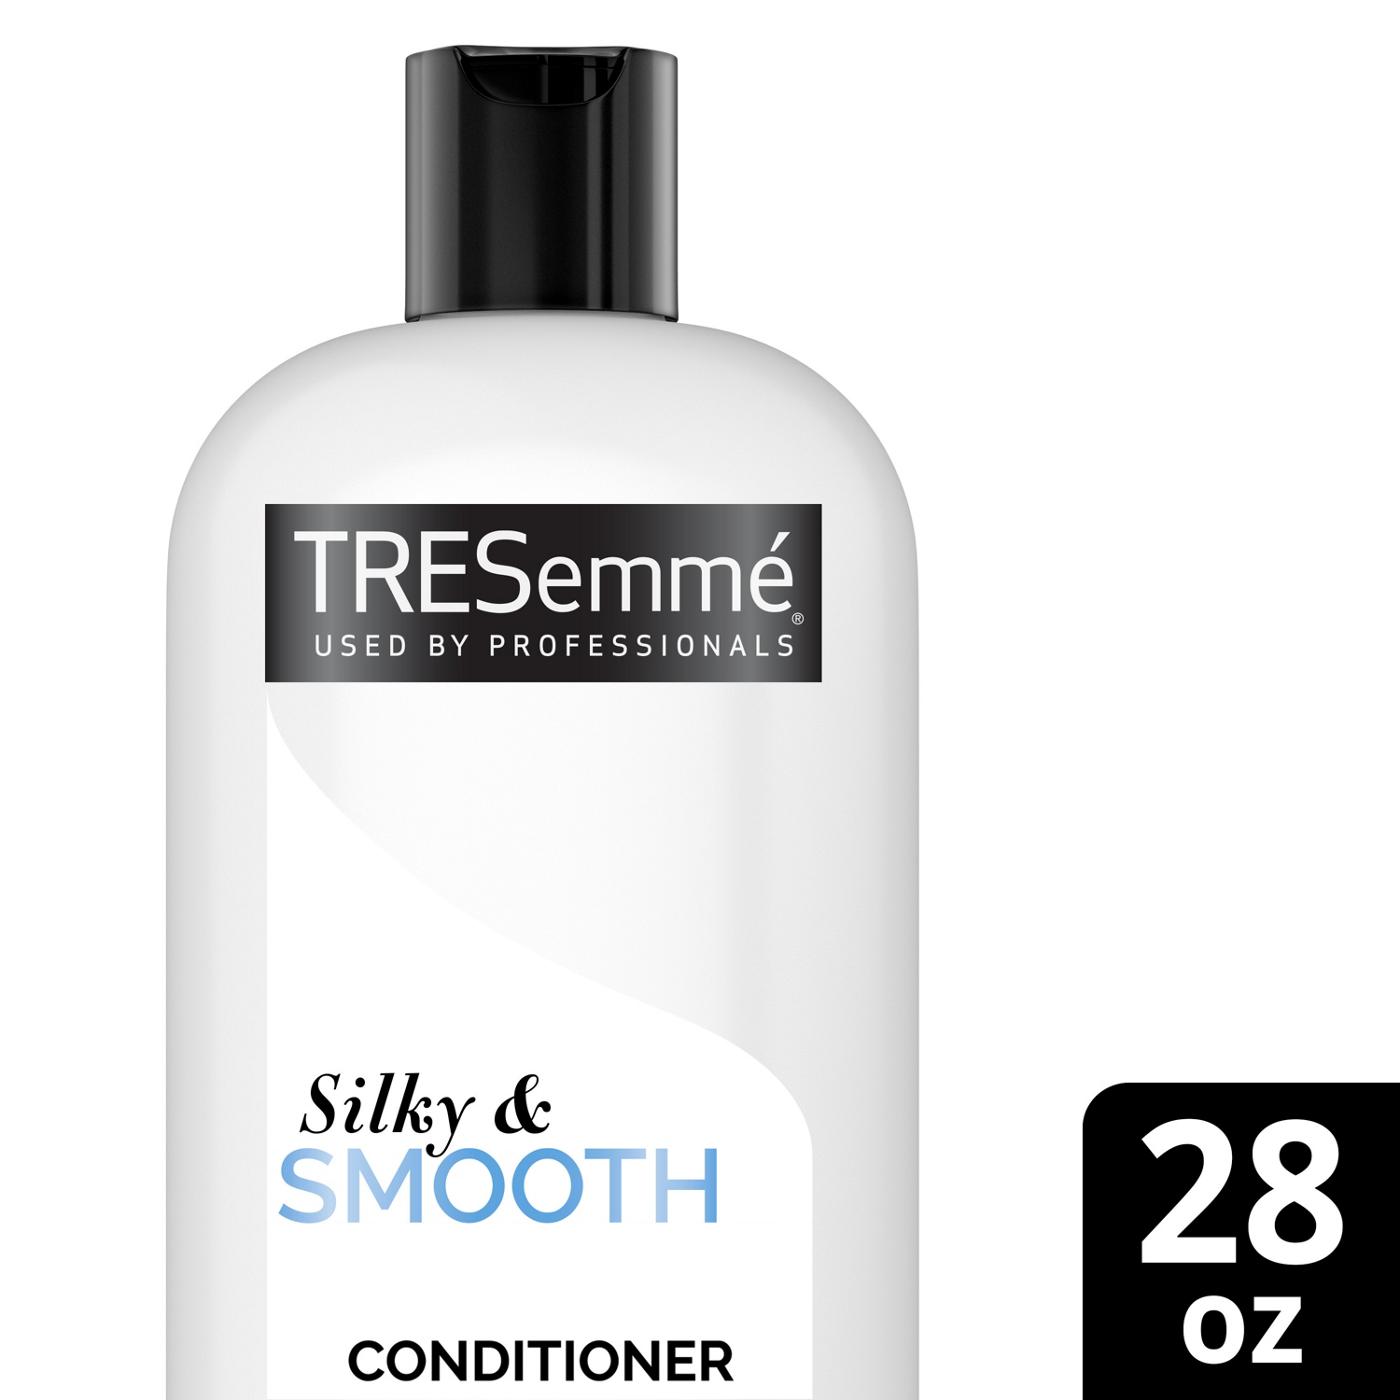 TRESemmé Silky & Smooth Anti-Frizz Conditioner; image 2 of 3